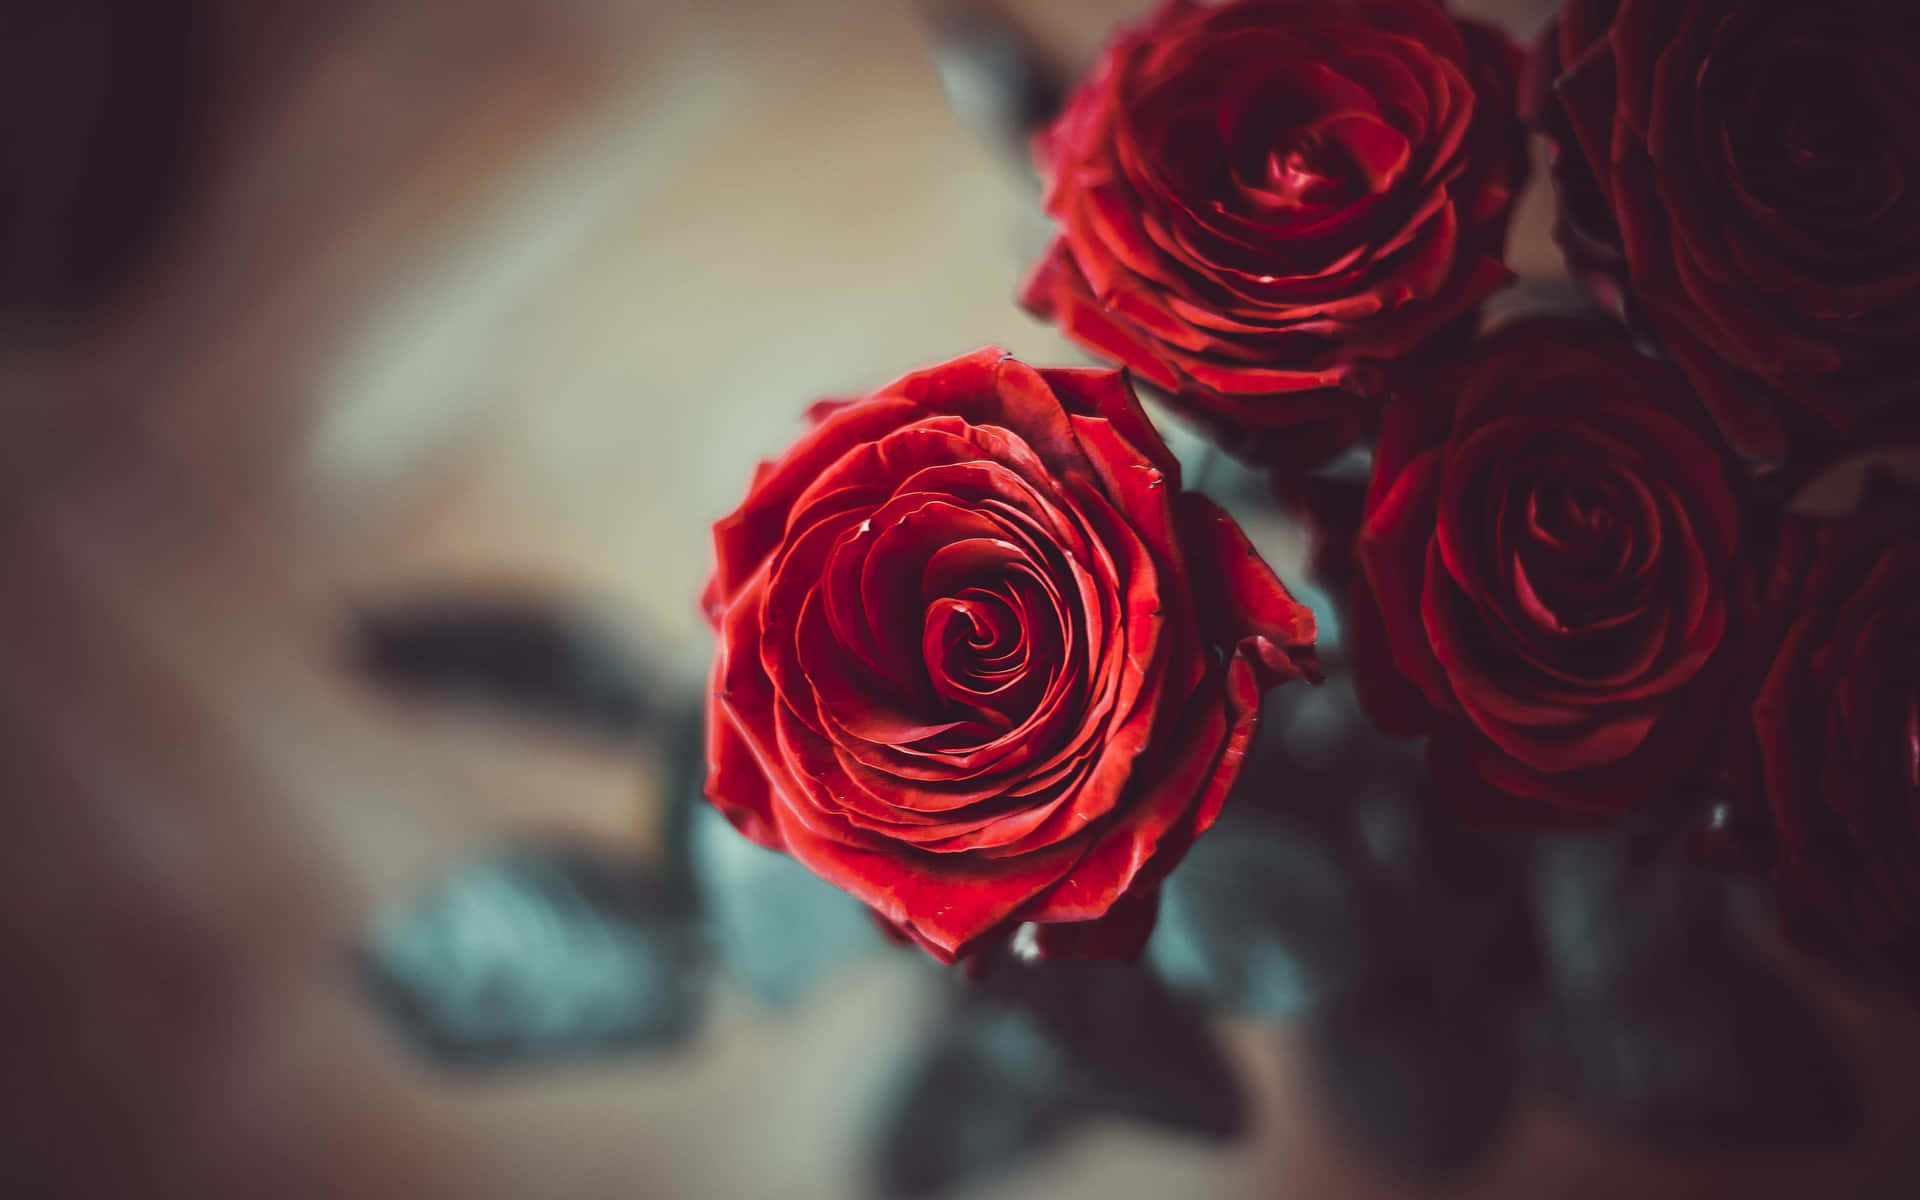 A Bouquet of Red Roses For Valentine's Day Wallpaper